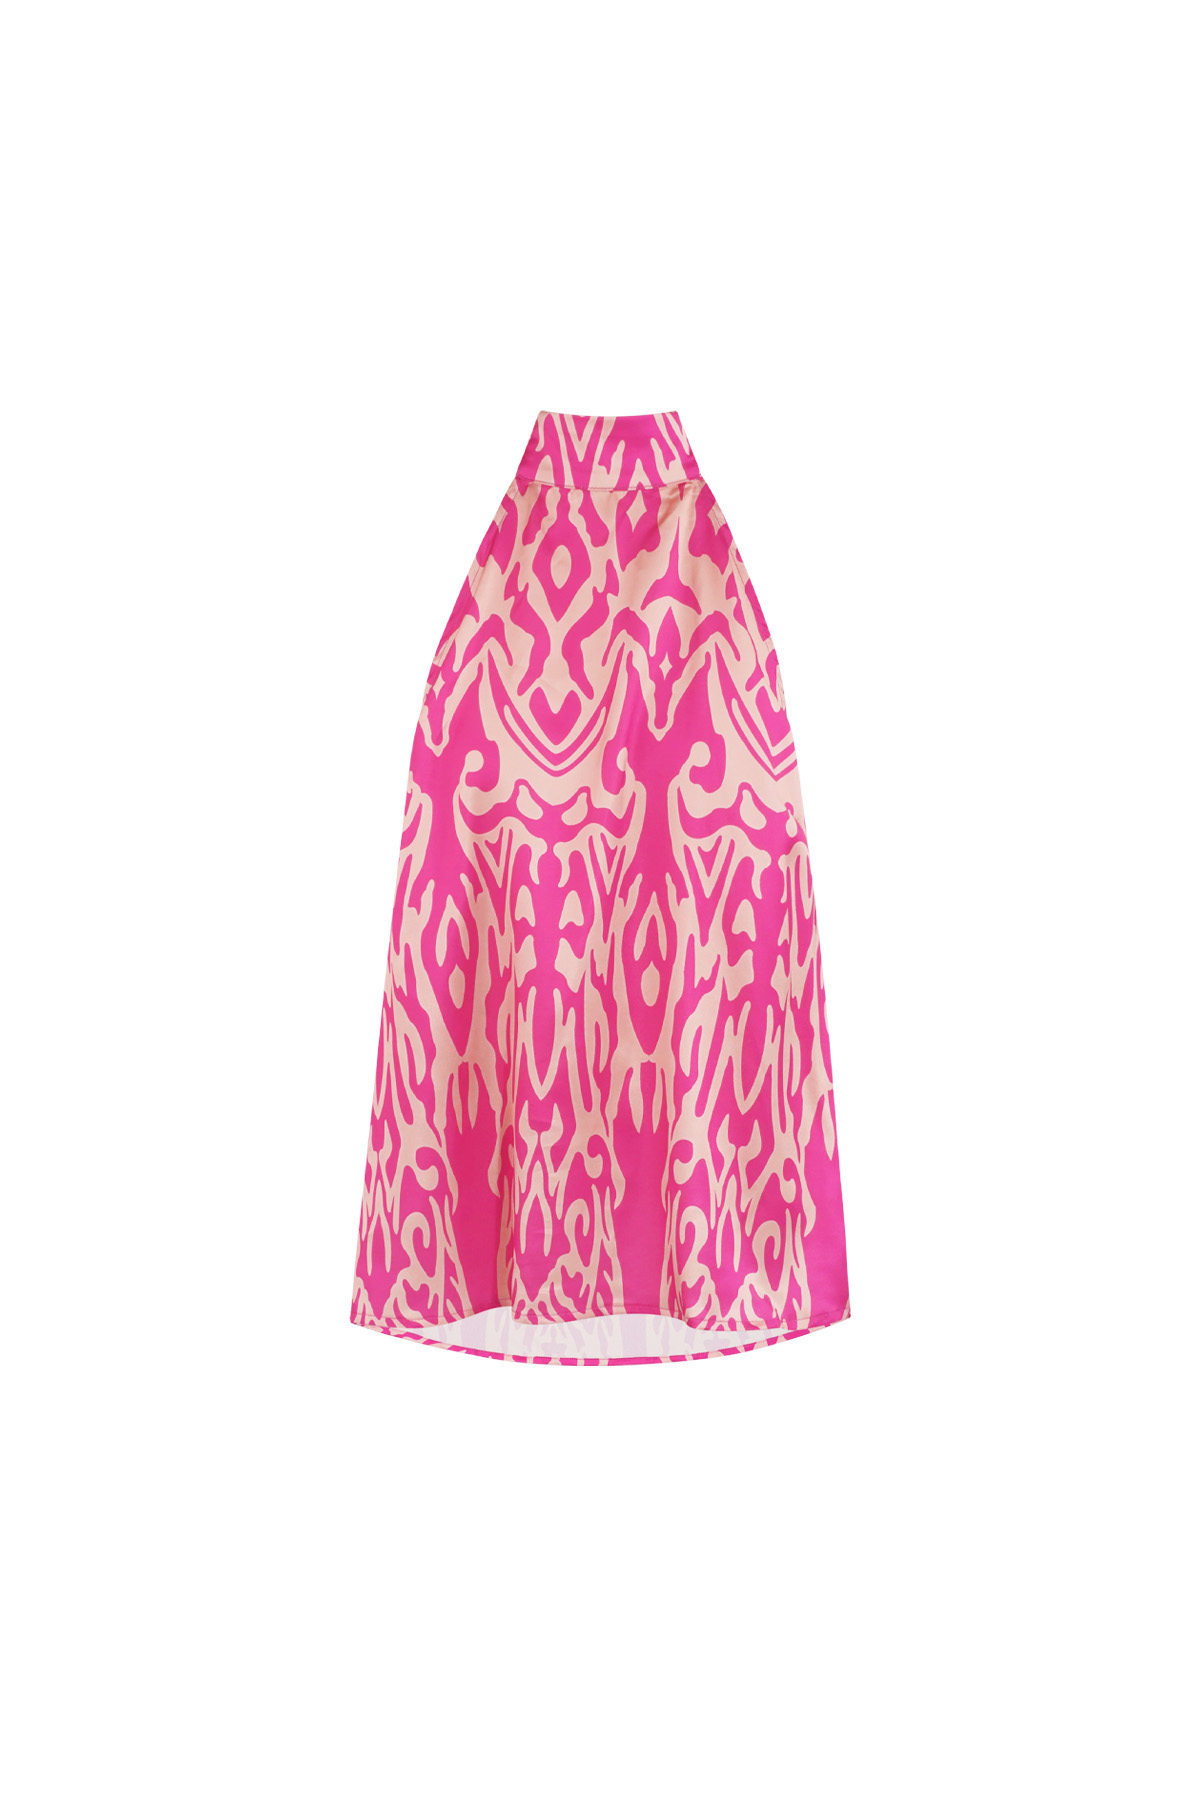 Top dos nu ambiance tropicale - fuchsia